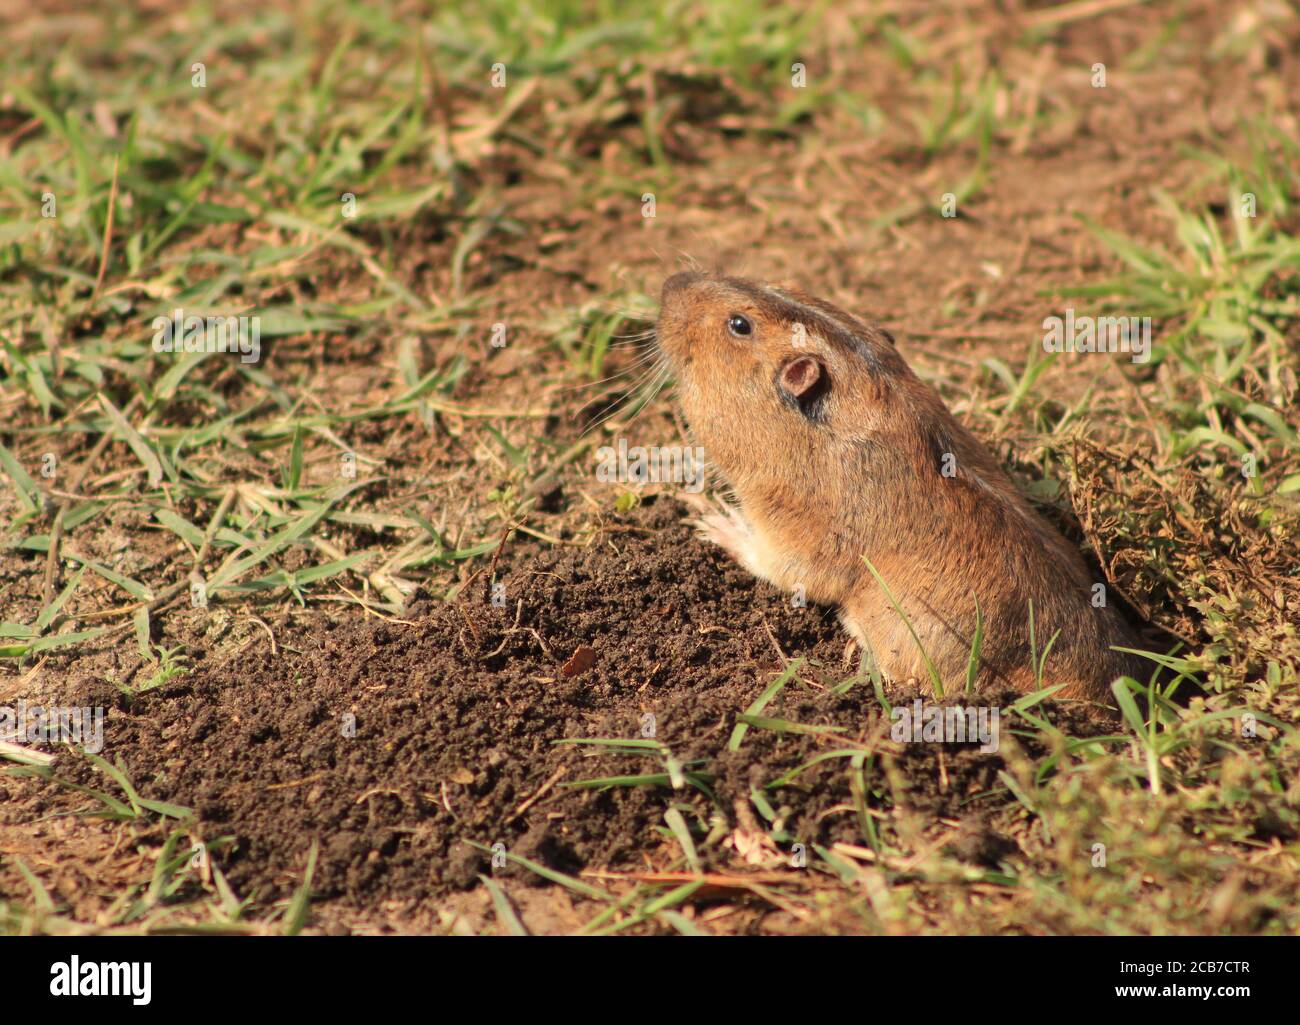 Closeup shot of an adorable tuco-tuco coming out of a burrow Stock Photo